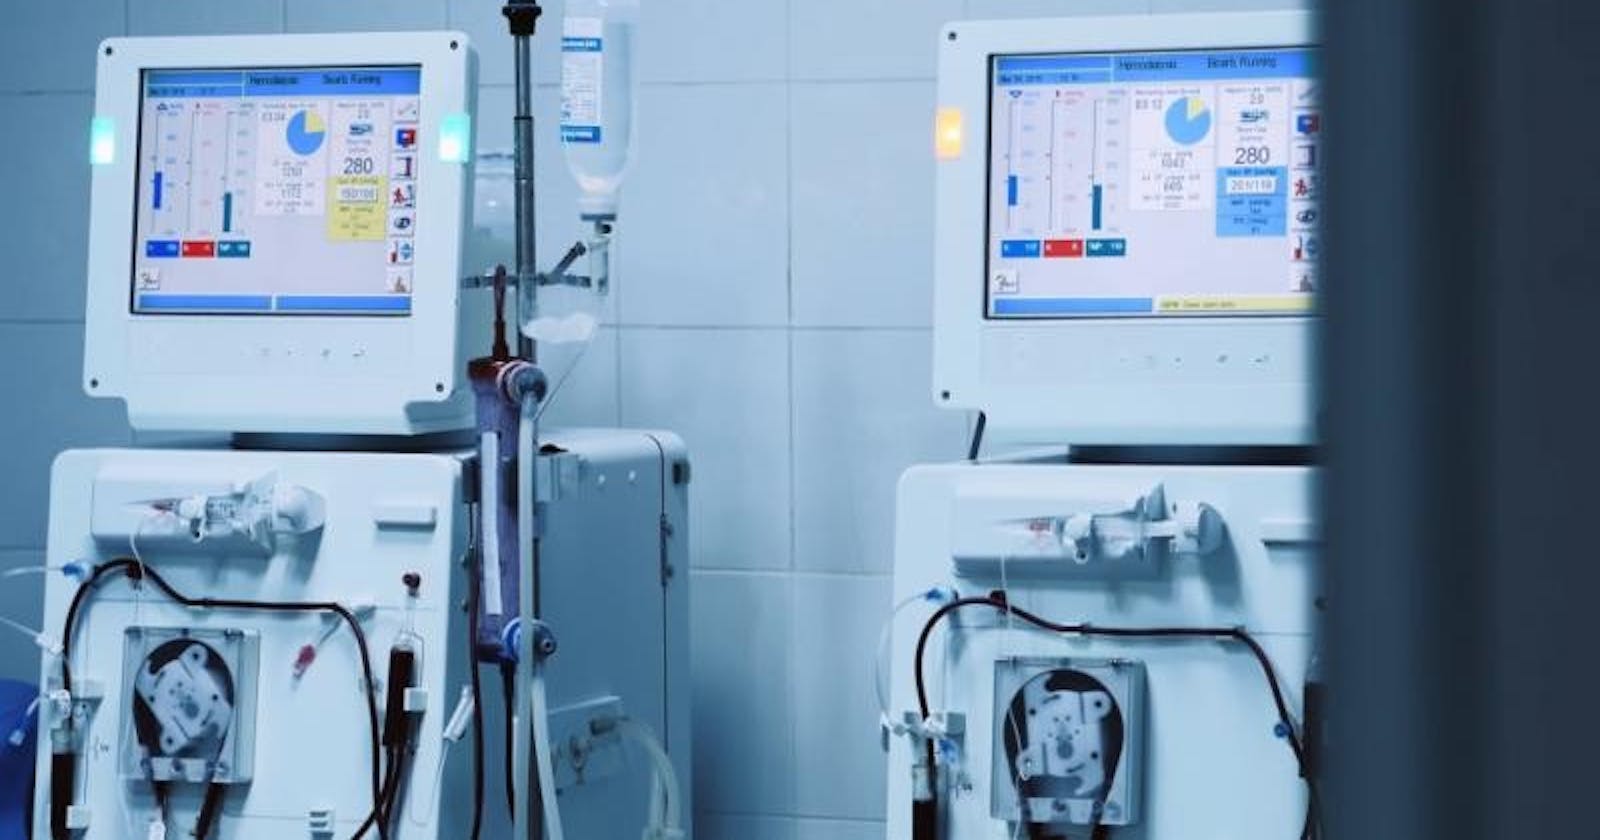 Blood Purification Equipment Market 2021-26: Trends, Share, Scope, Forecast and Analysis